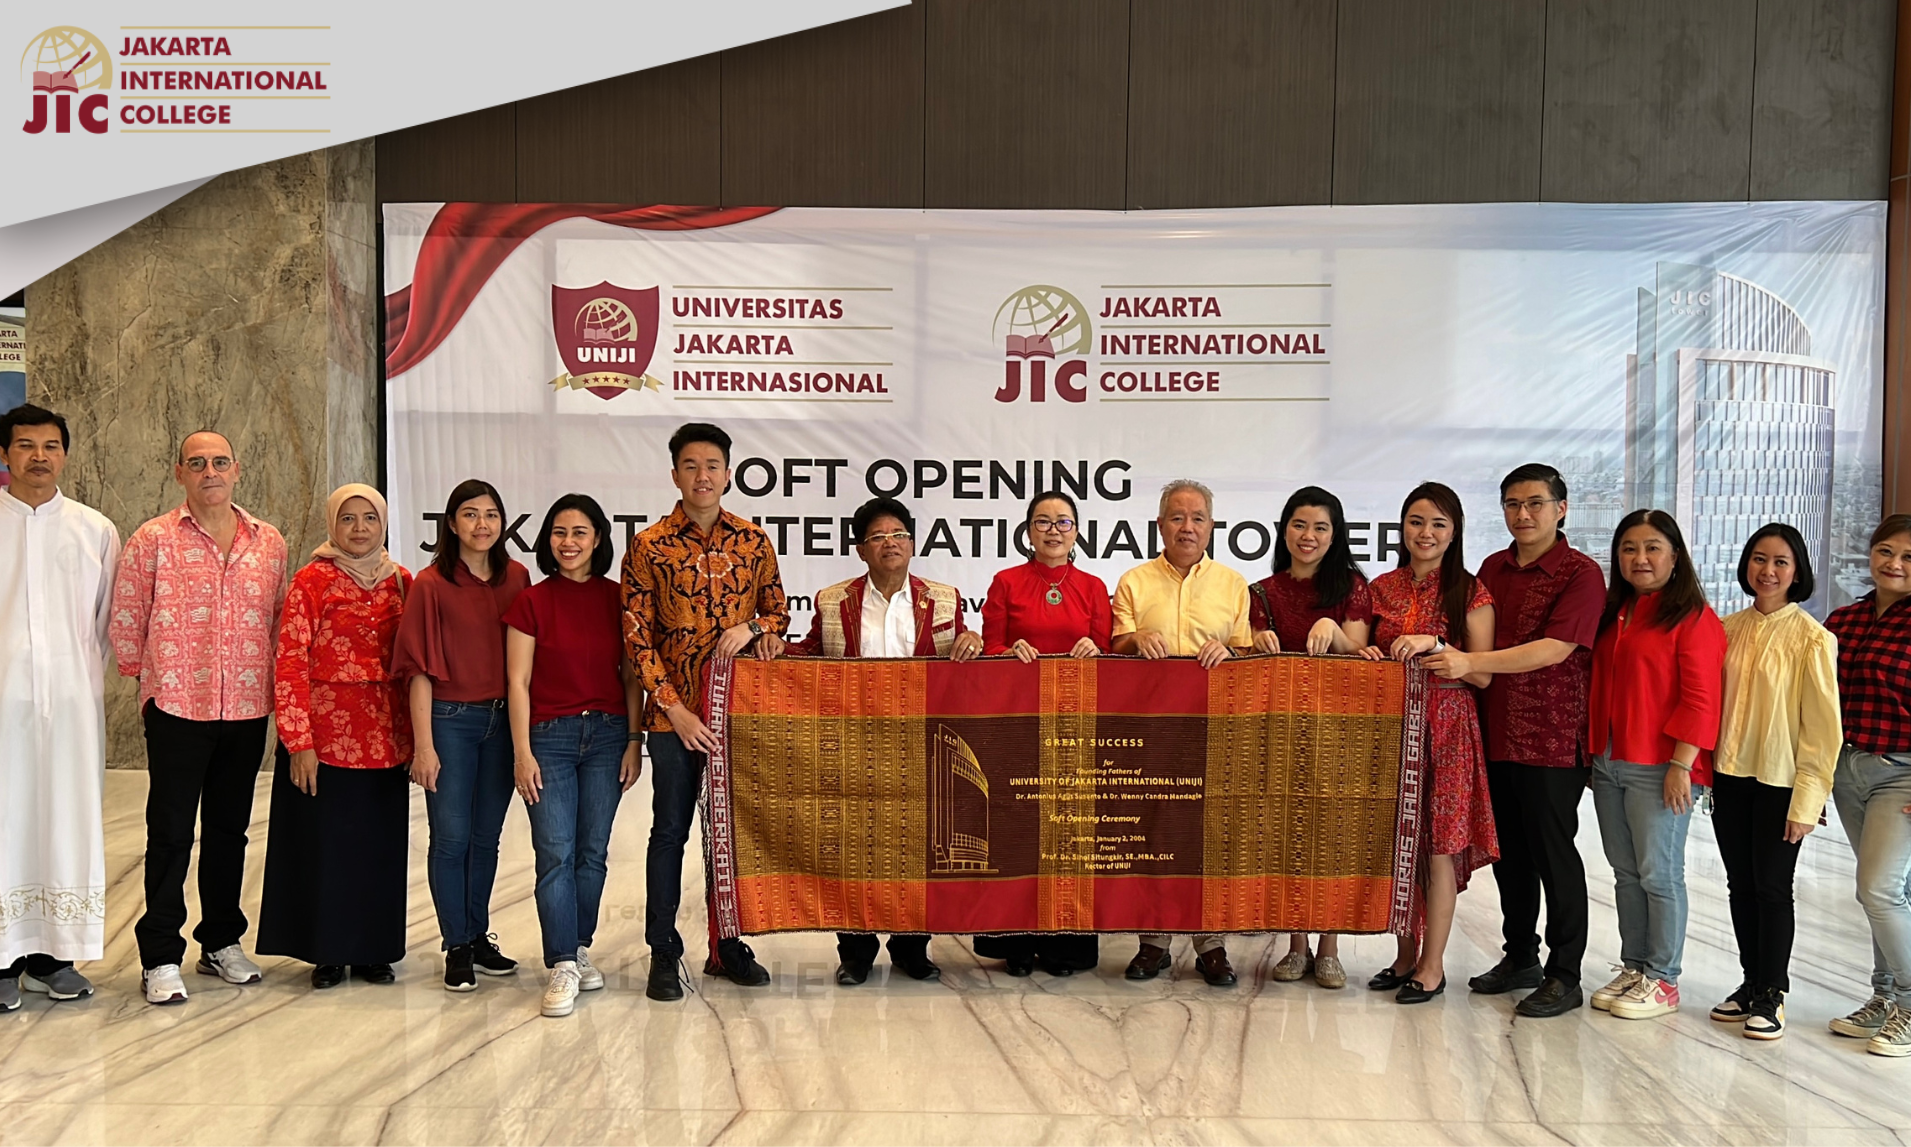 Soft Opening of Jakarta International College's New Campus